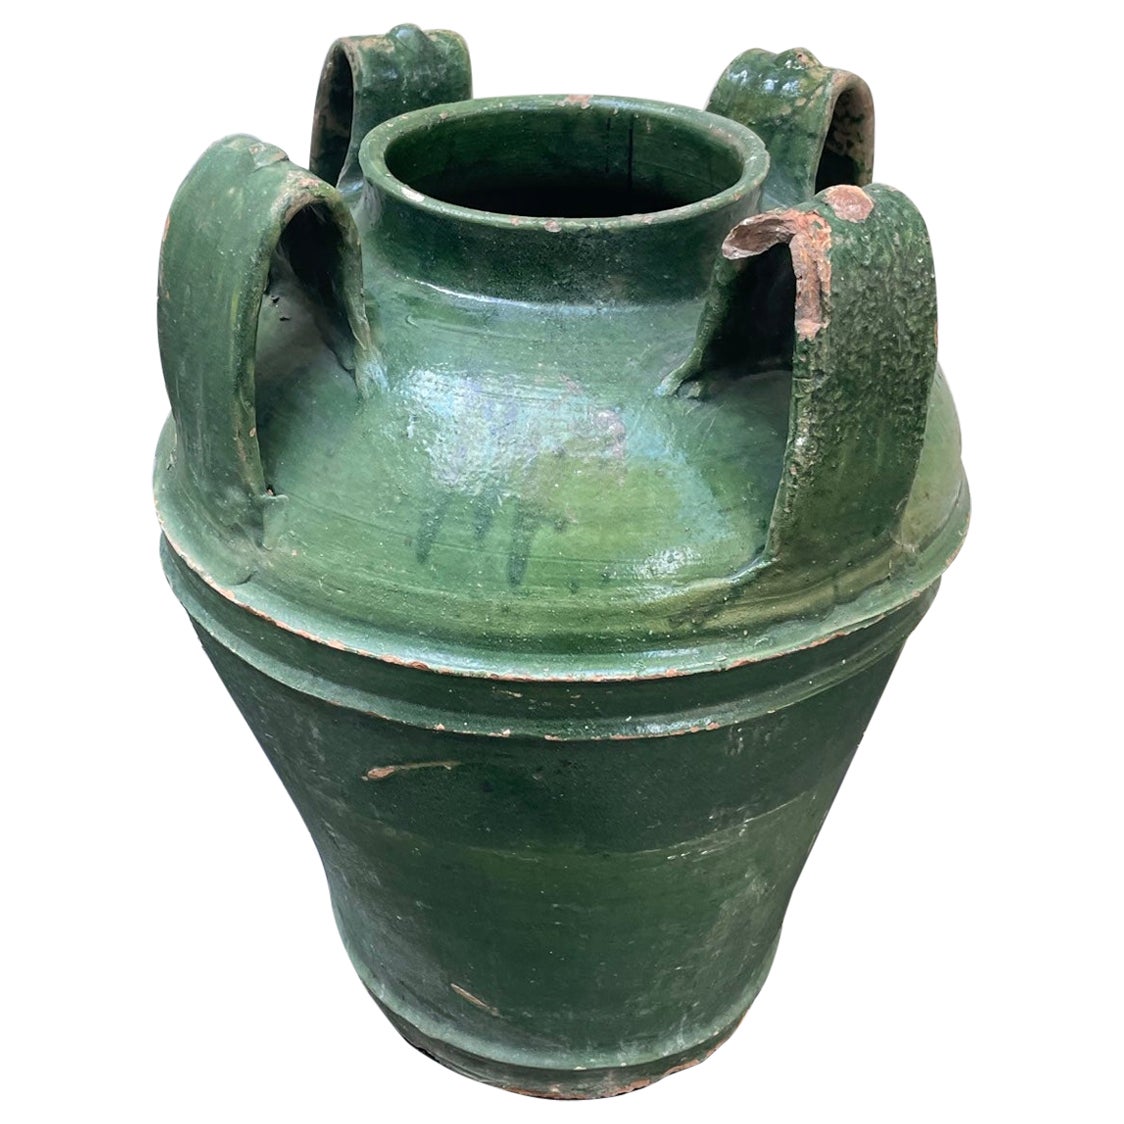 What is a terracotta amphora?